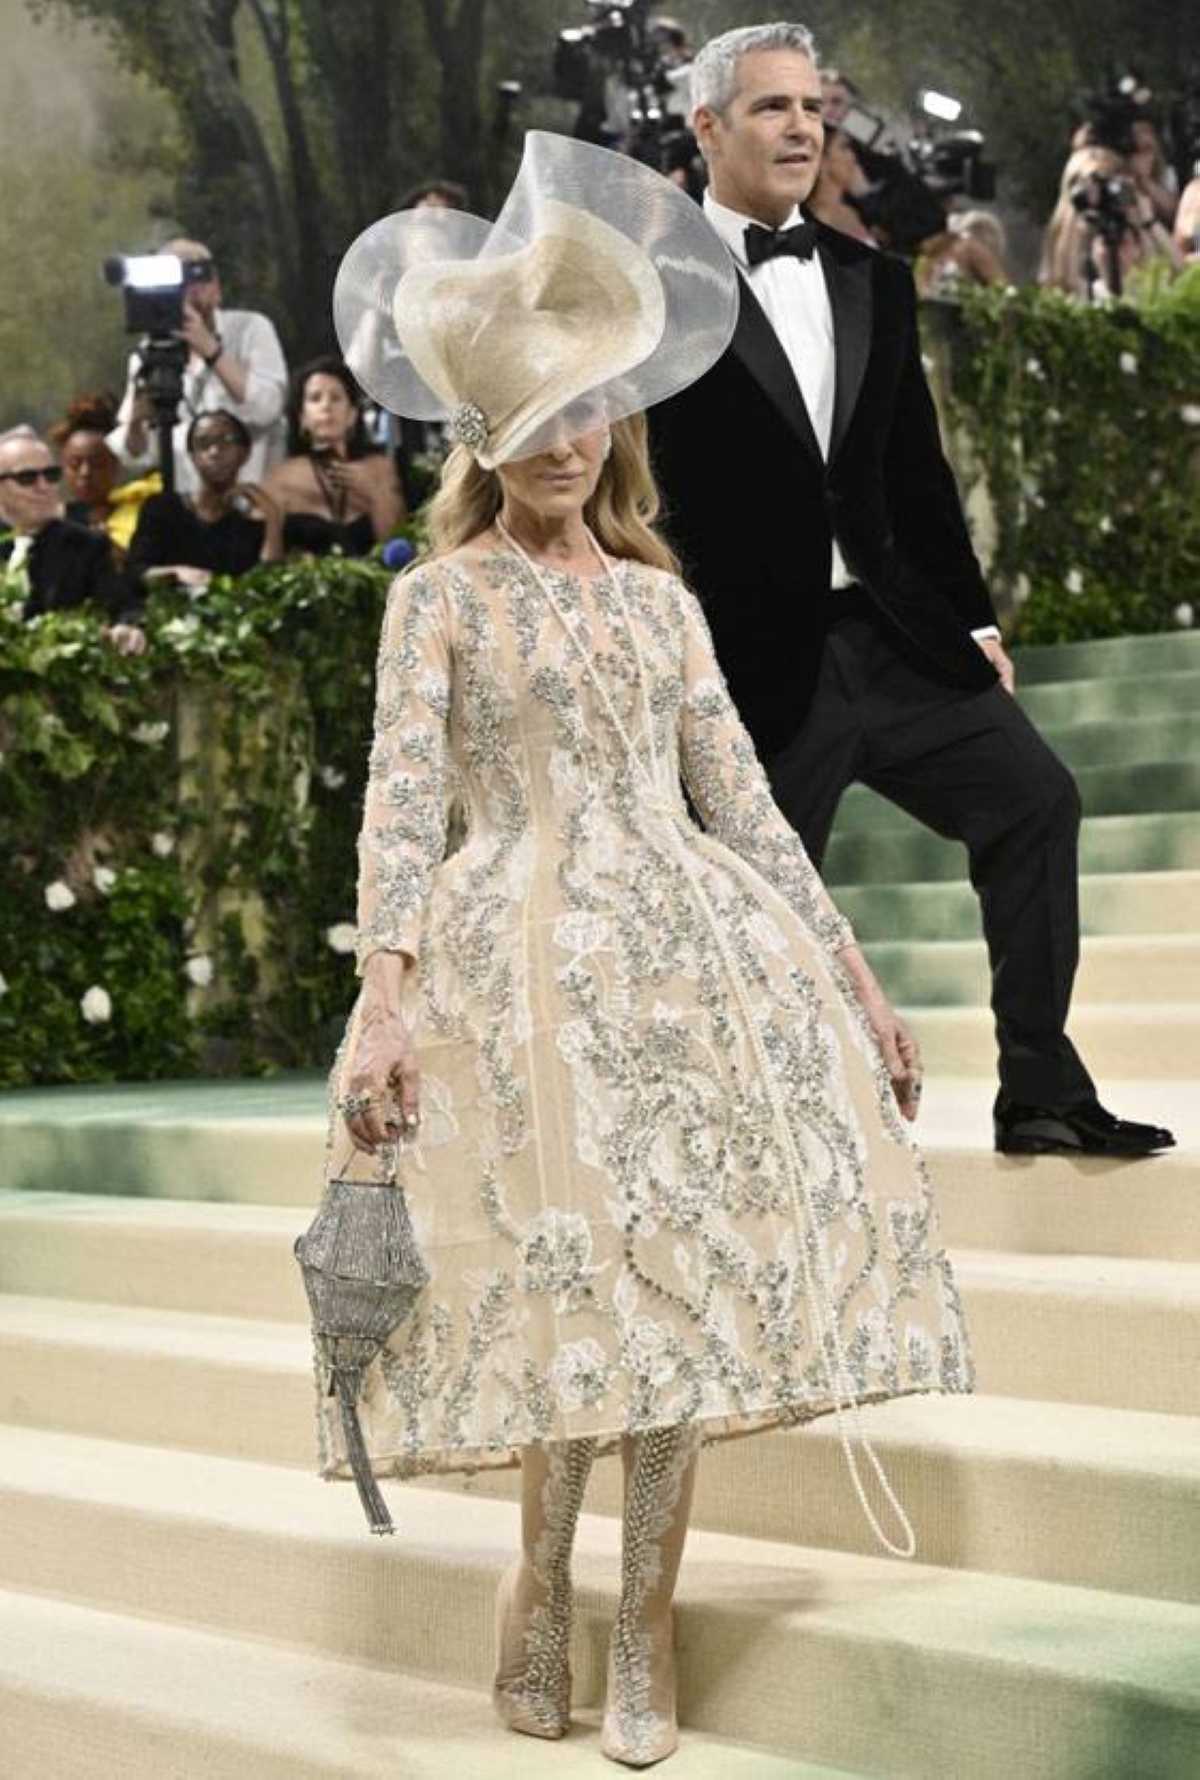 Sarah Jessica Parker was in an Alice in Wonderland look with a lavender overlay.